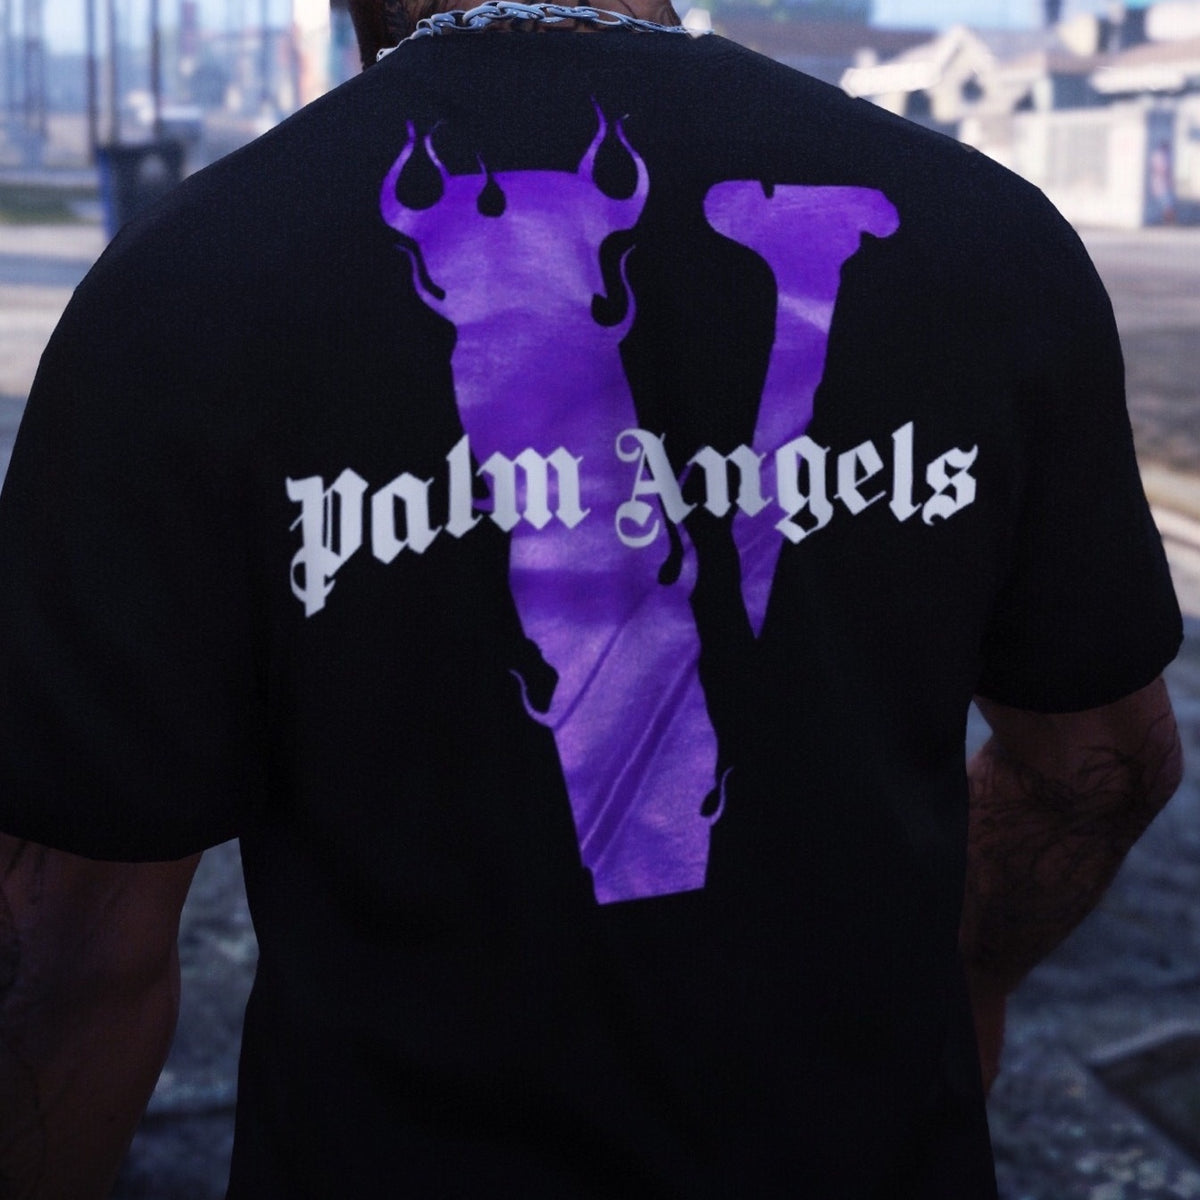 How To Spot Real Vs Fake Vlone x Palm Angels Tee – LegitGrails